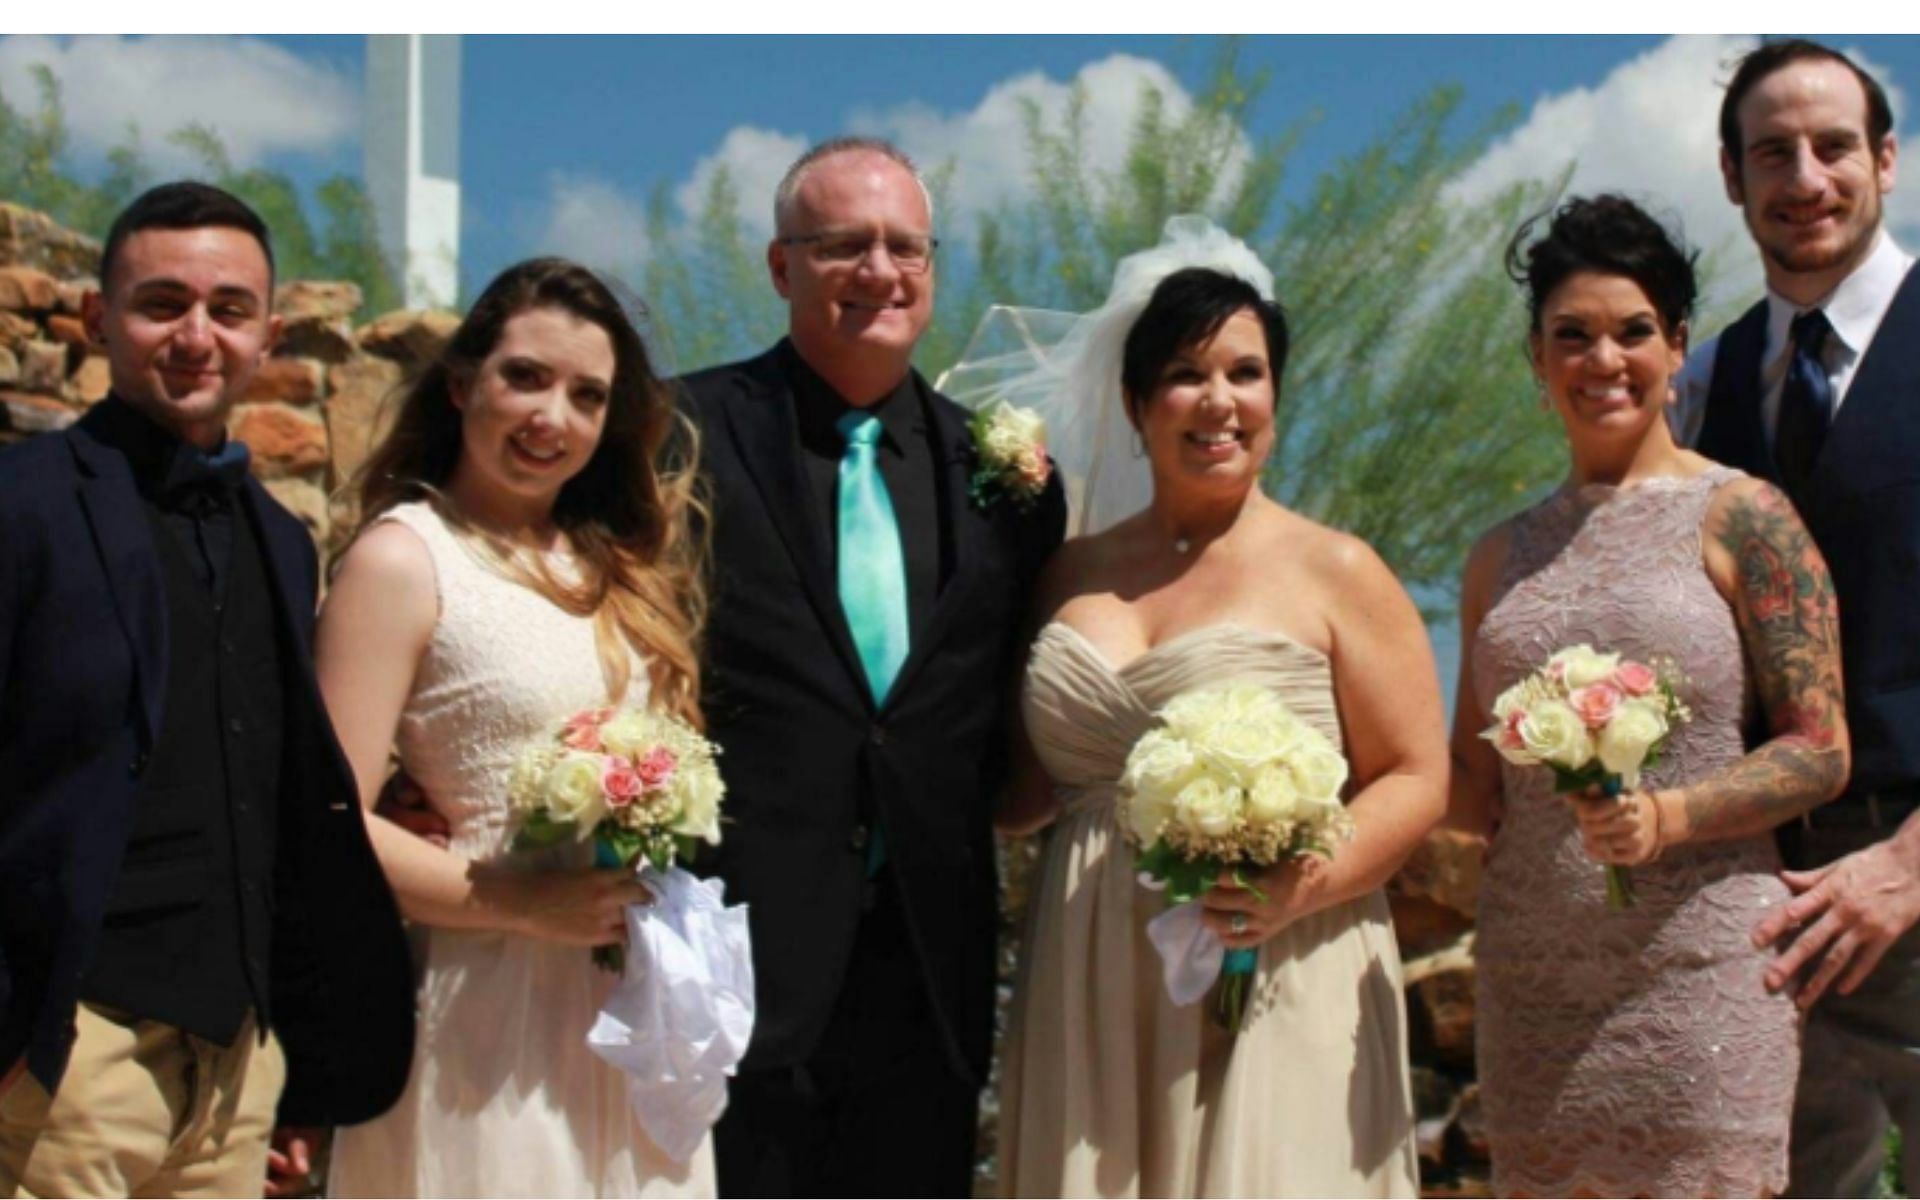 Vickie Guerrero and her daughters at her wedding in 2015